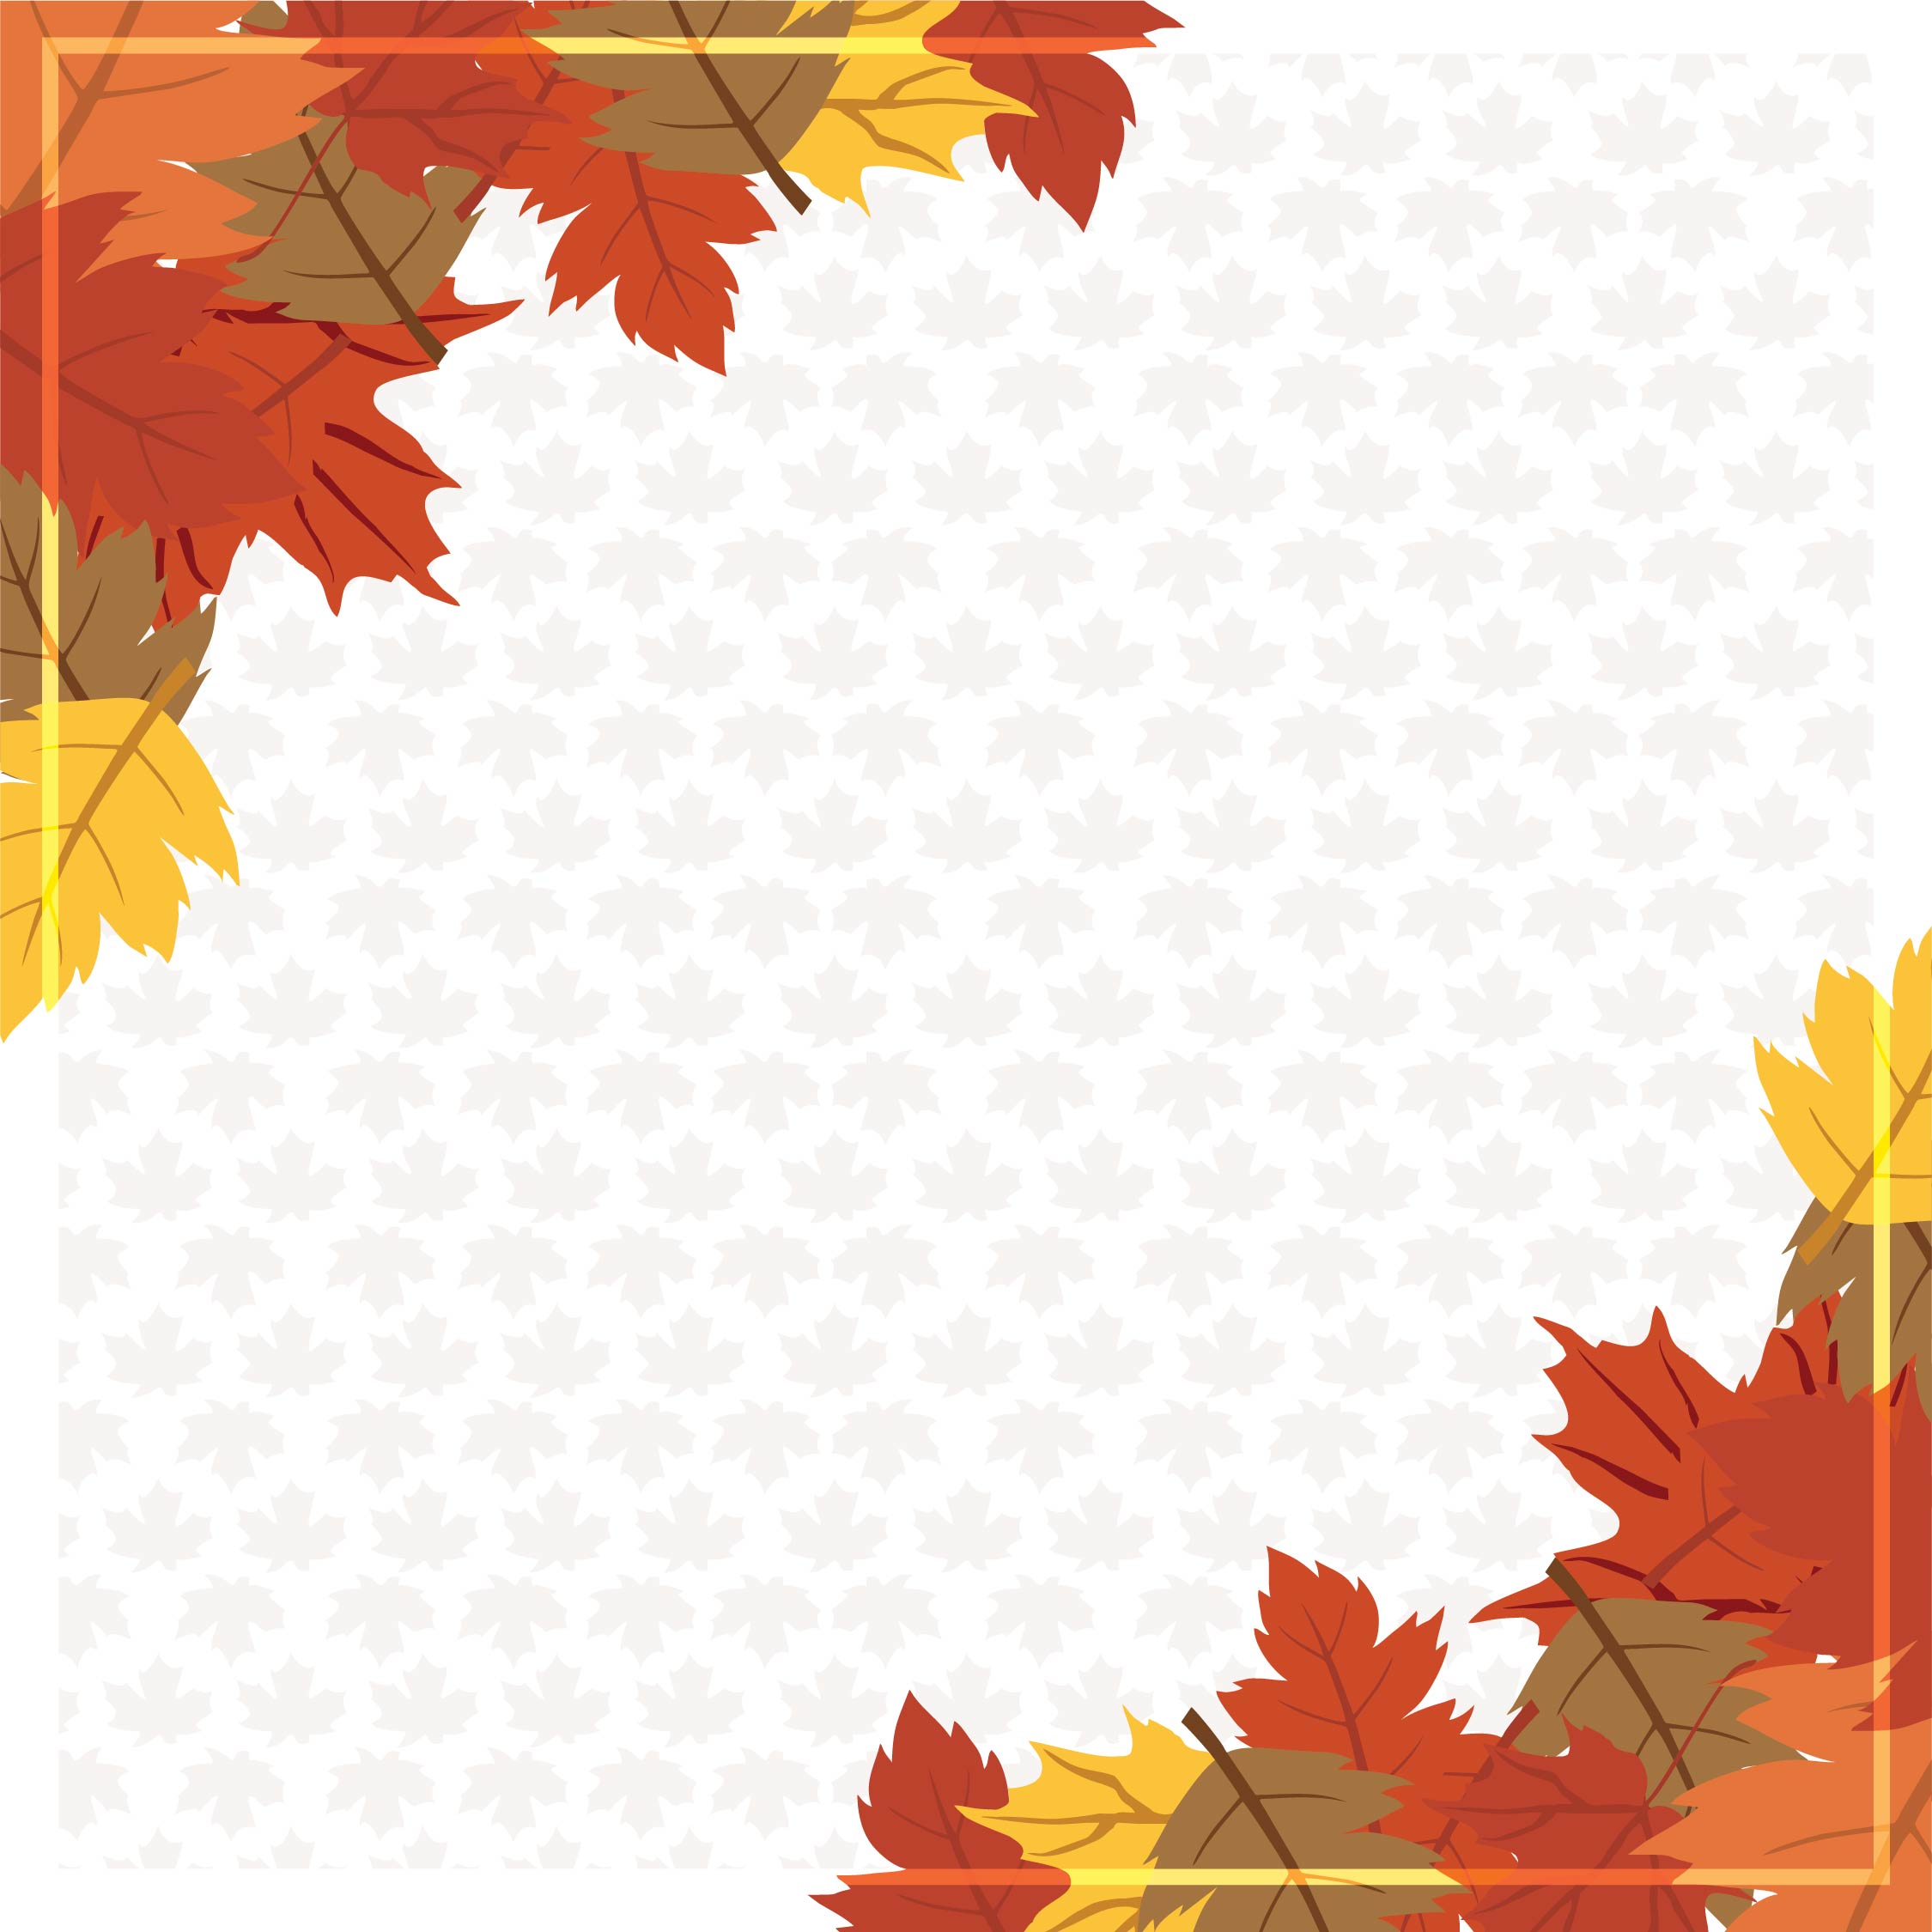 free clip art borders for thanksgiving - photo #44